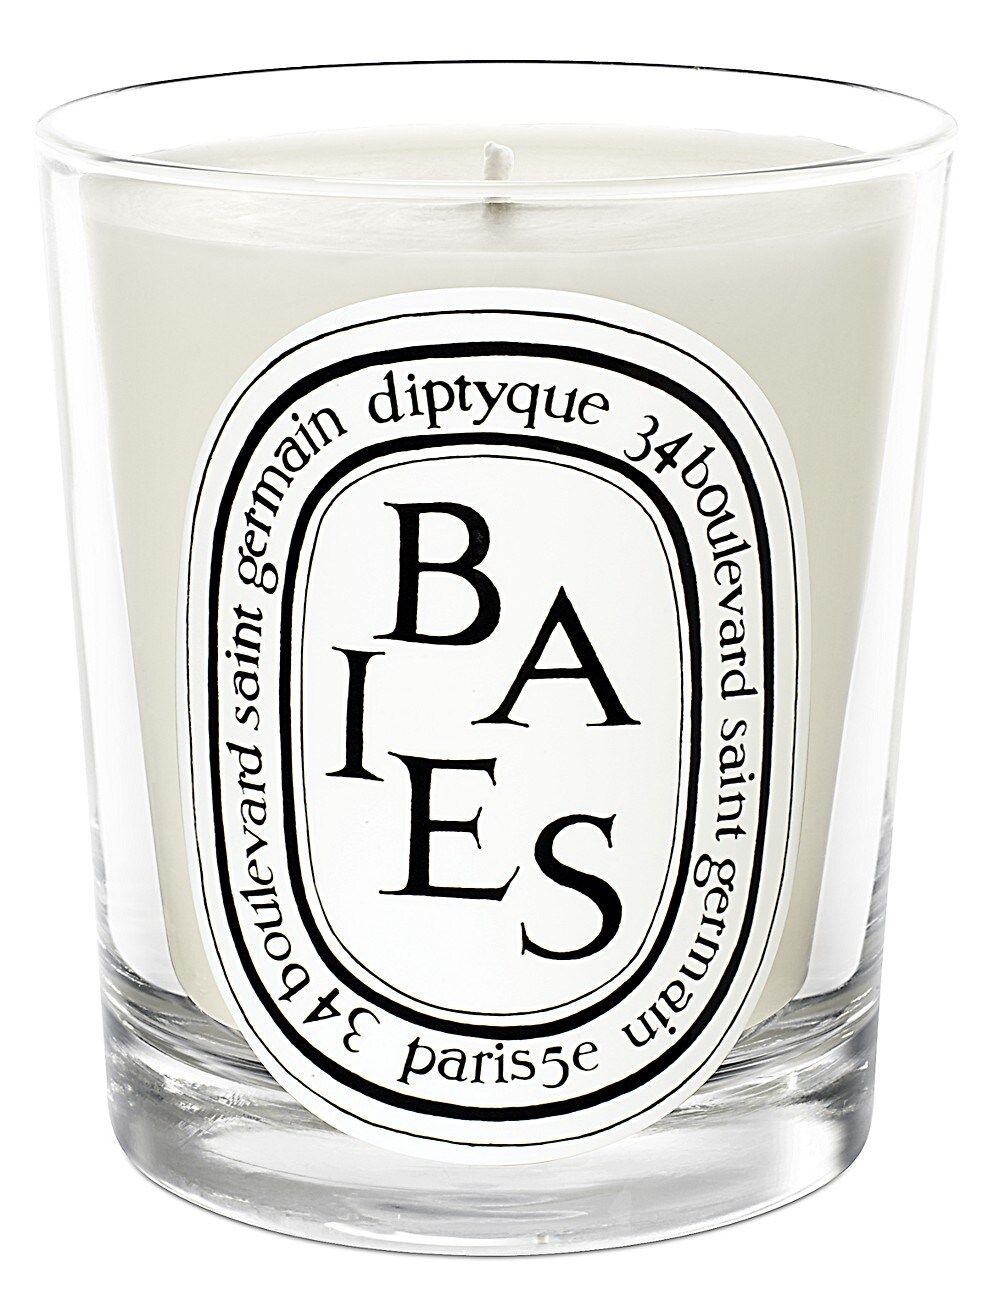 Diptyque Baies Candle | Saks Fifth Avenue